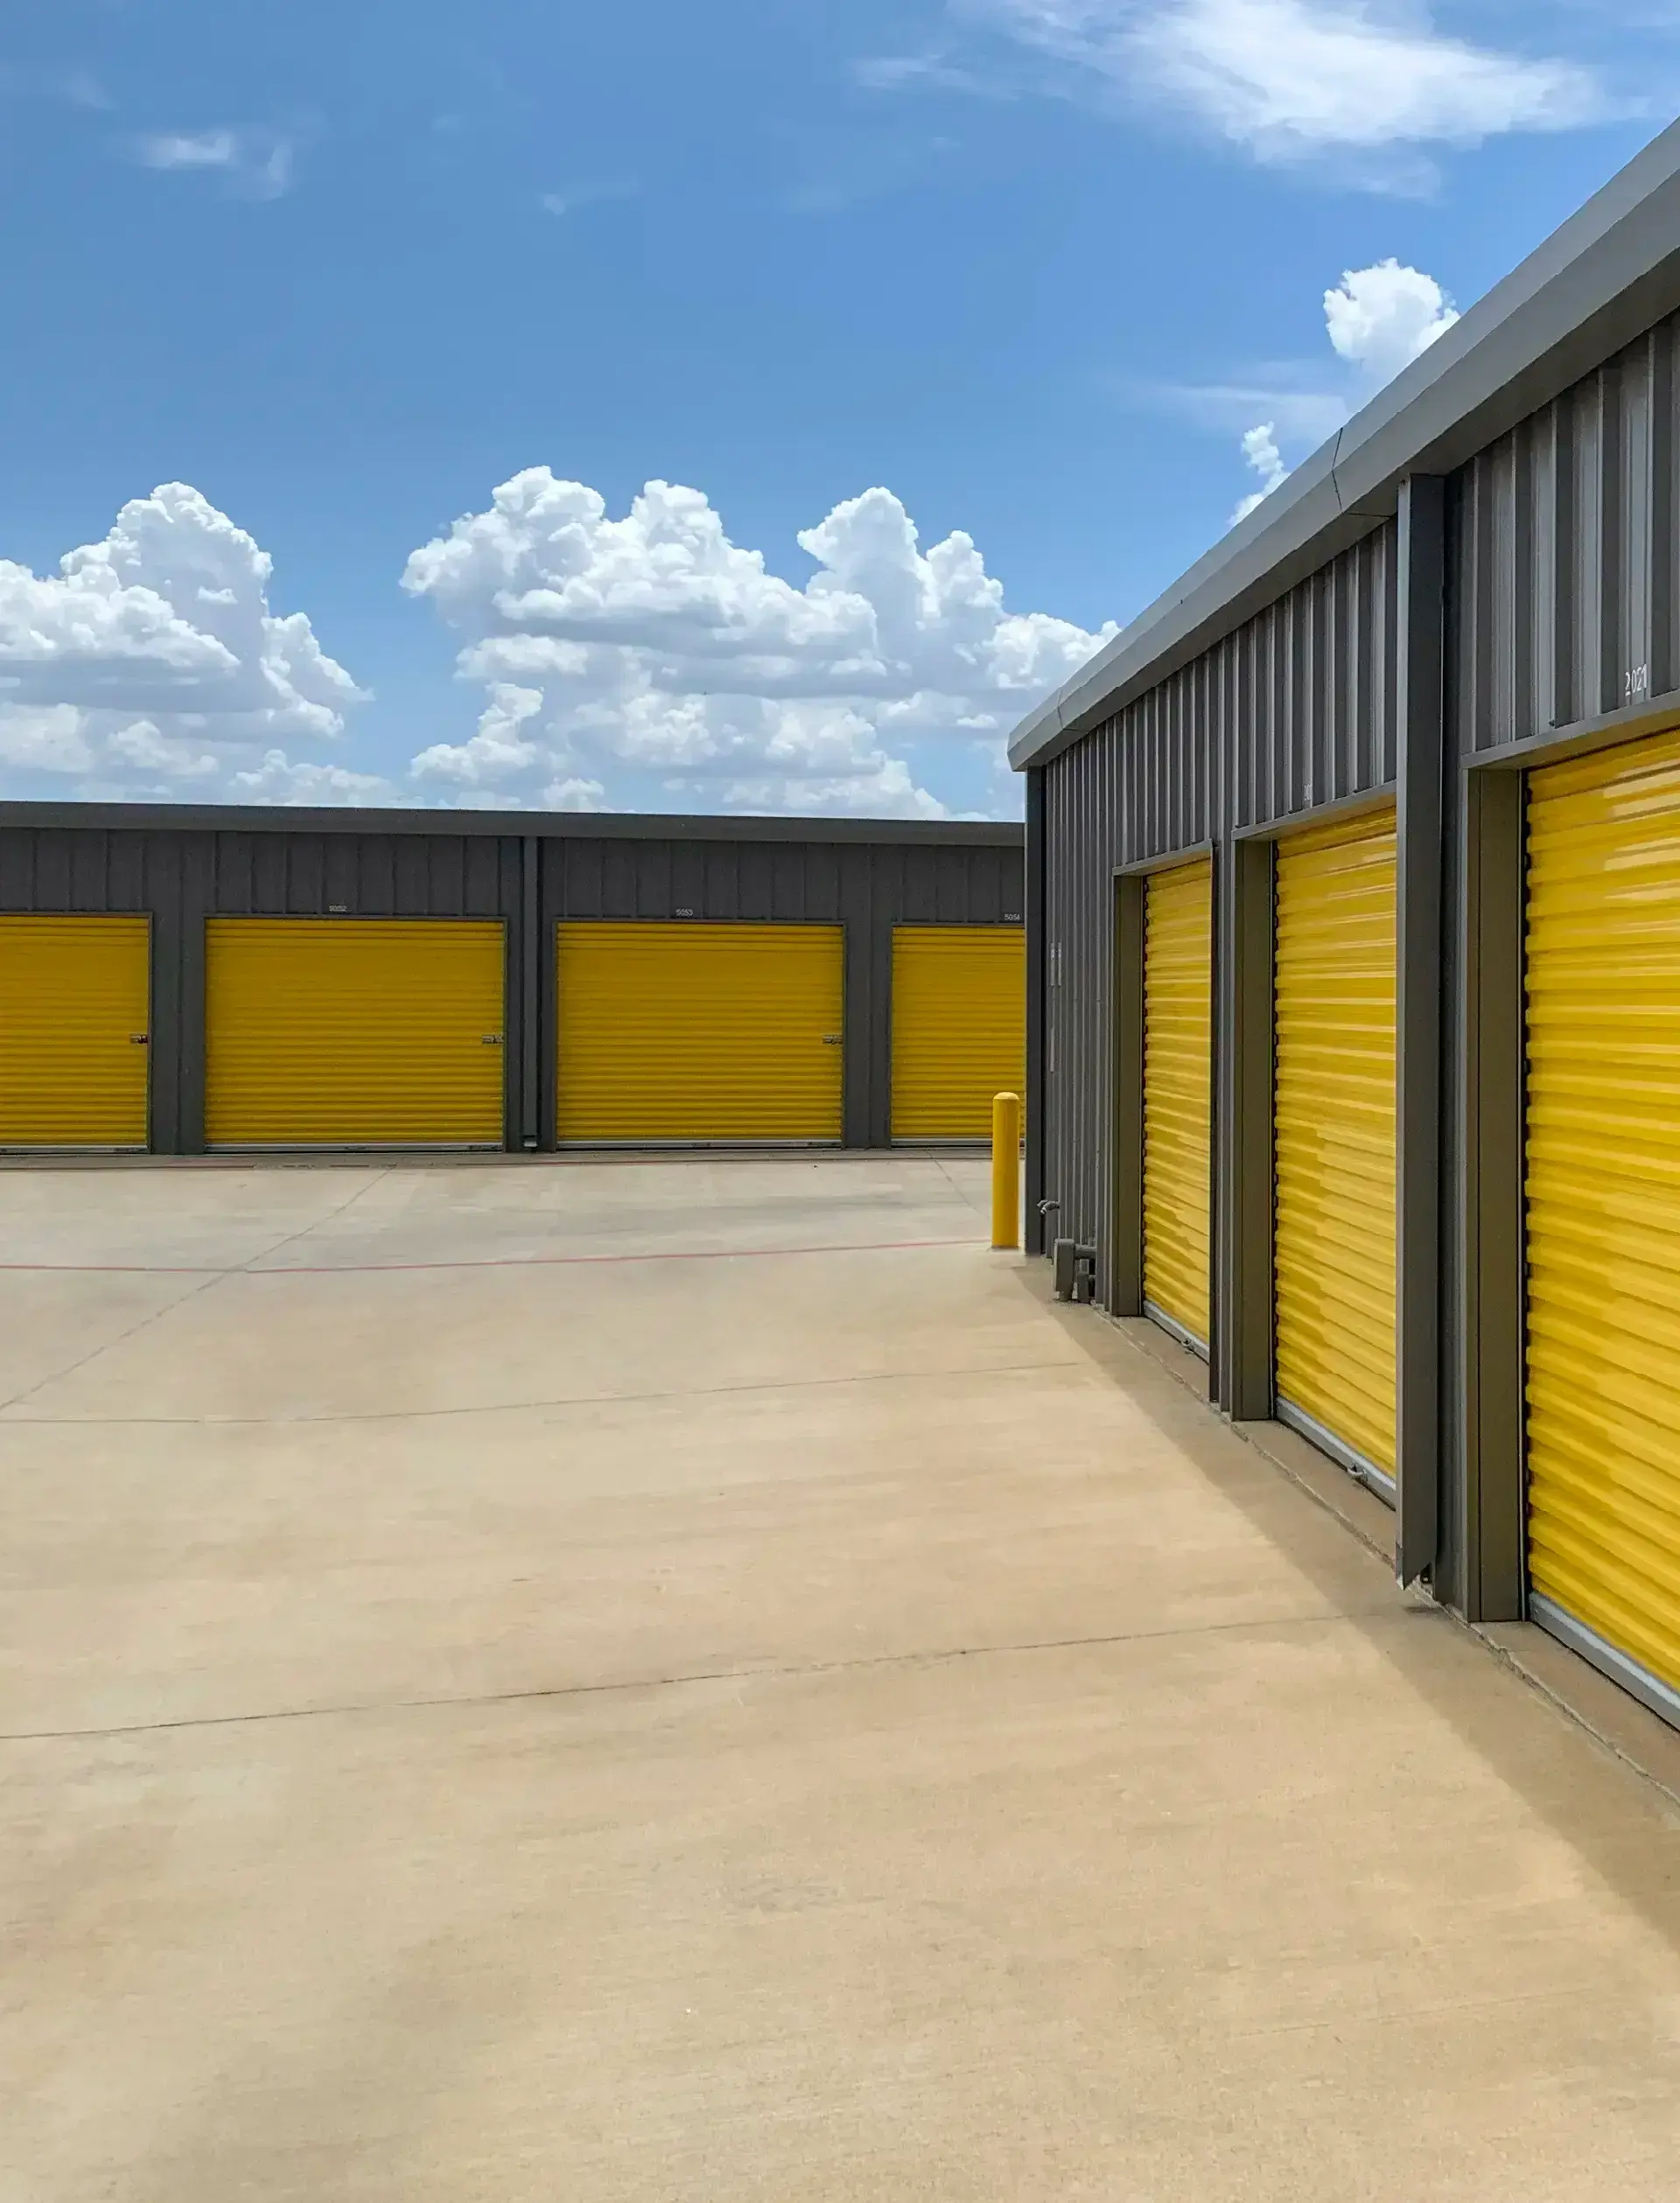 Outdoor shot of warehouses, storage facility, hangars or garages with yellow rolling gates